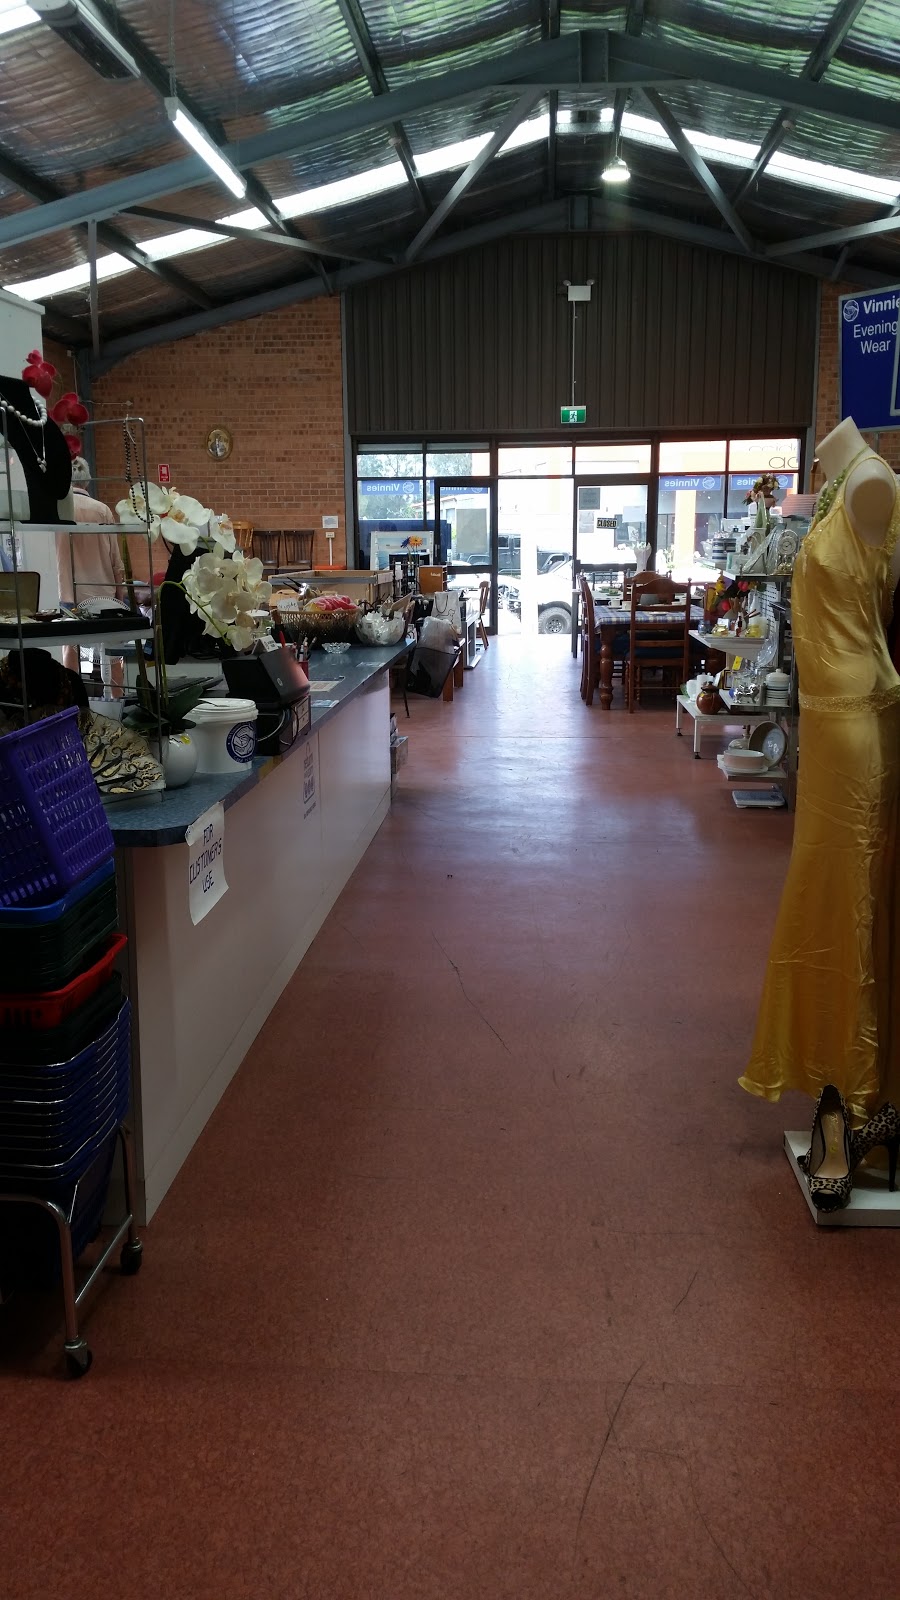 Vinnies North Wollongong | store | 110 Montague St, North Wollongong NSW 2500, Australia | 0242297919 OR +61 2 4229 7919